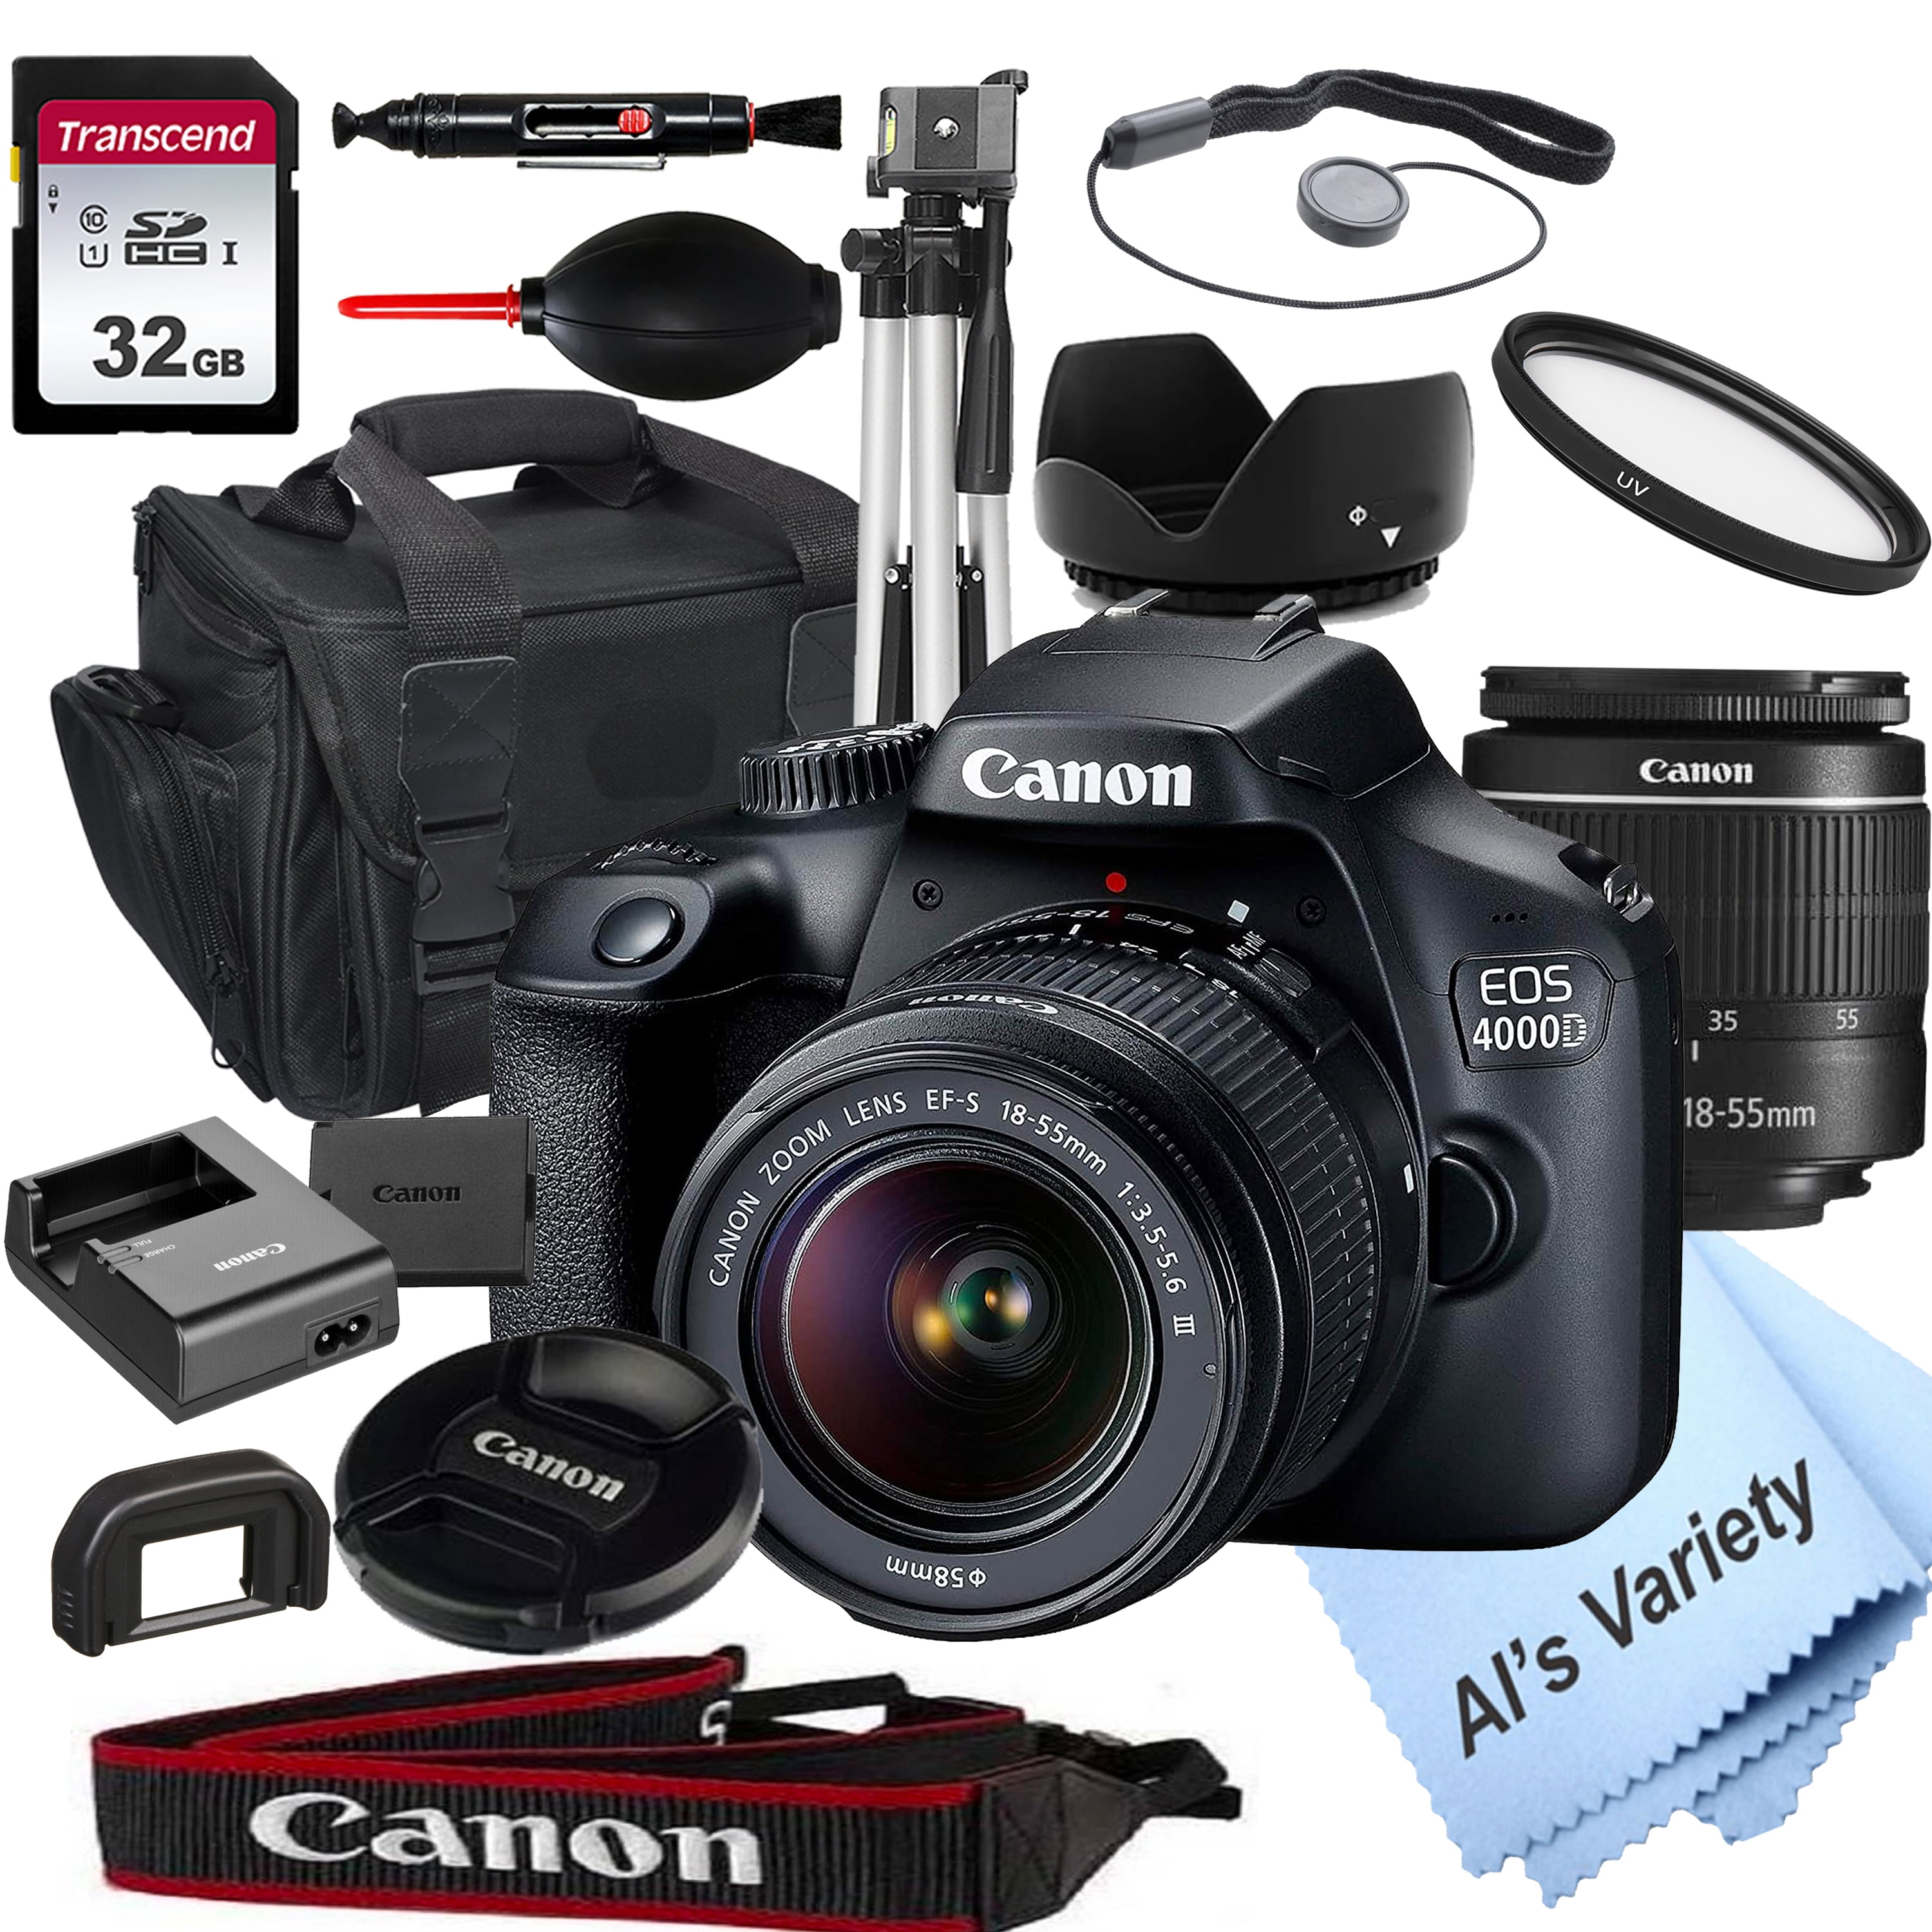 Canon EOS 4000D DSLR Camera with 18-55mm f/3.5-5.6 Zoom Lens + 32GB